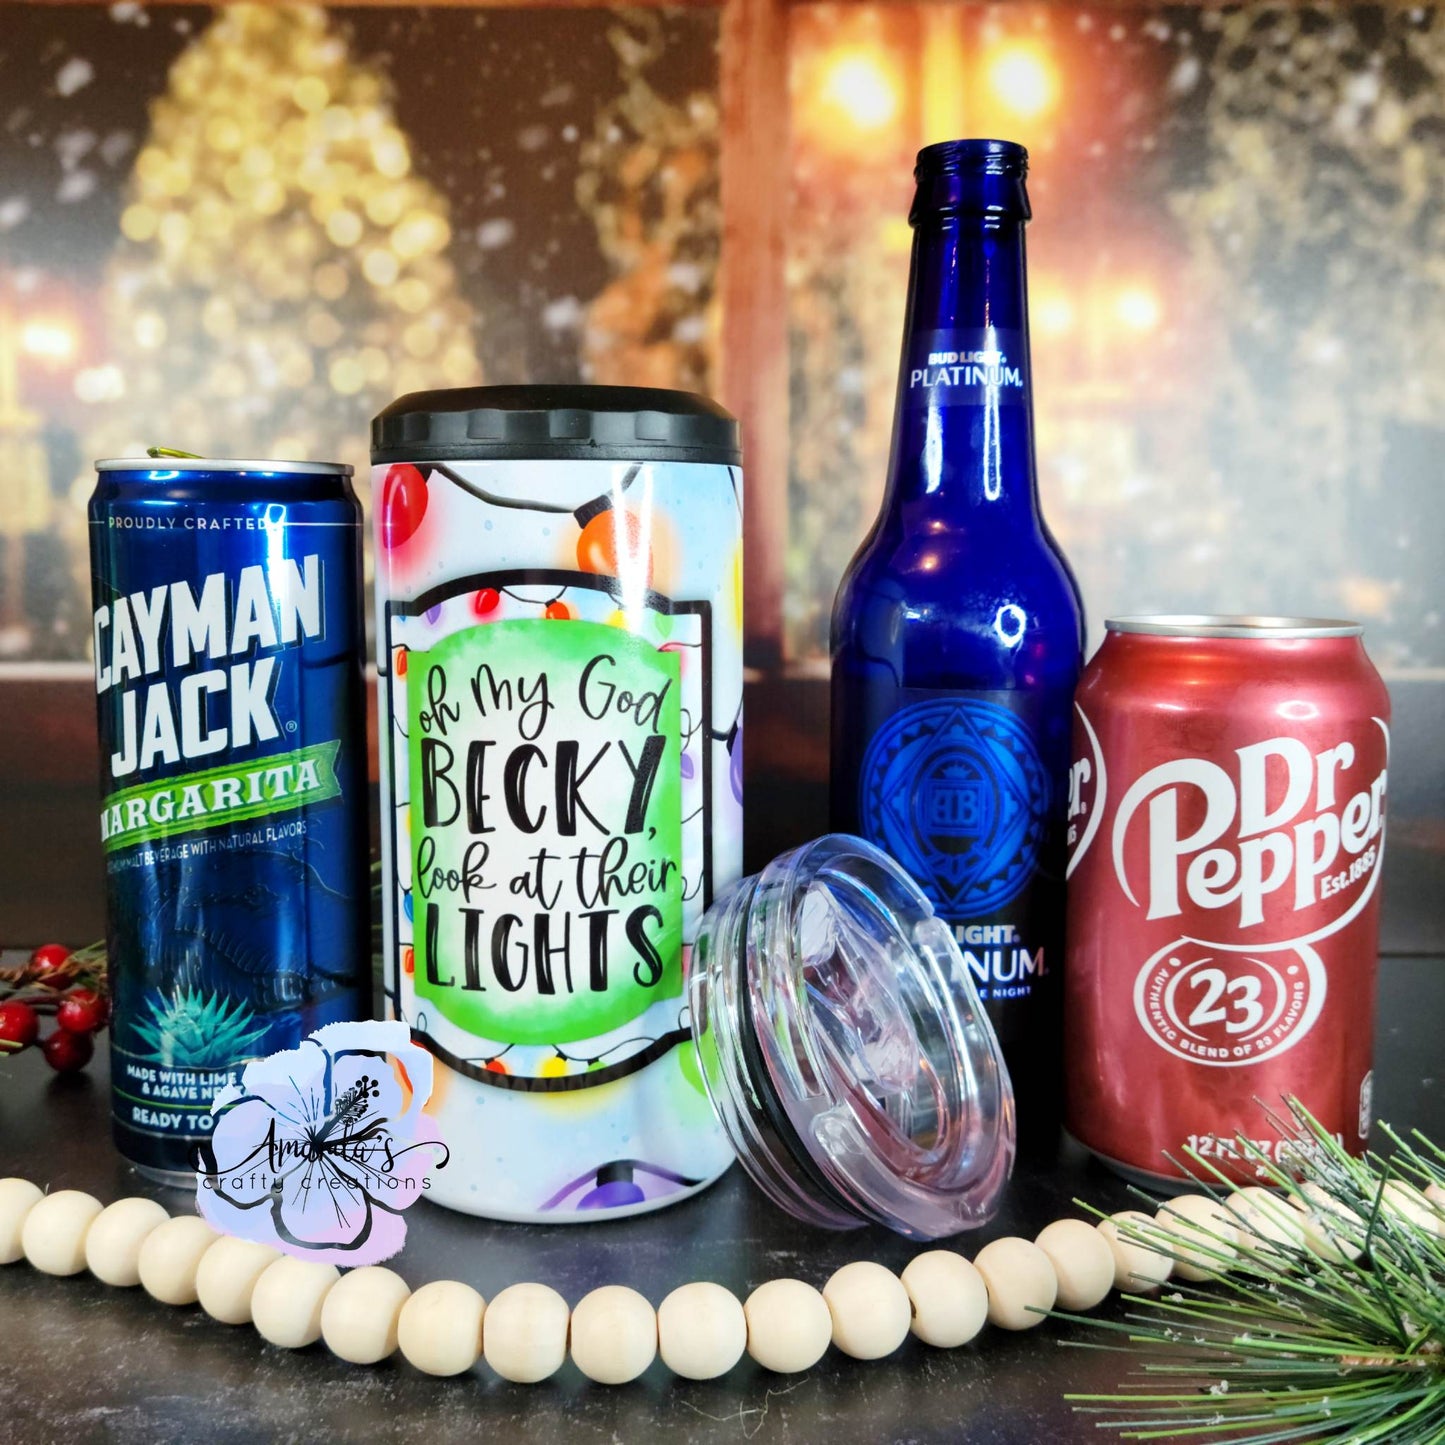 "Oh My God Becky, Look at Their Lights" 4 in 1 Metal can cooler, Christmas 4 in 1 skinny can holder metal,  Christmas lights, 4 in 1 skinny can holder metal, metal can coolers